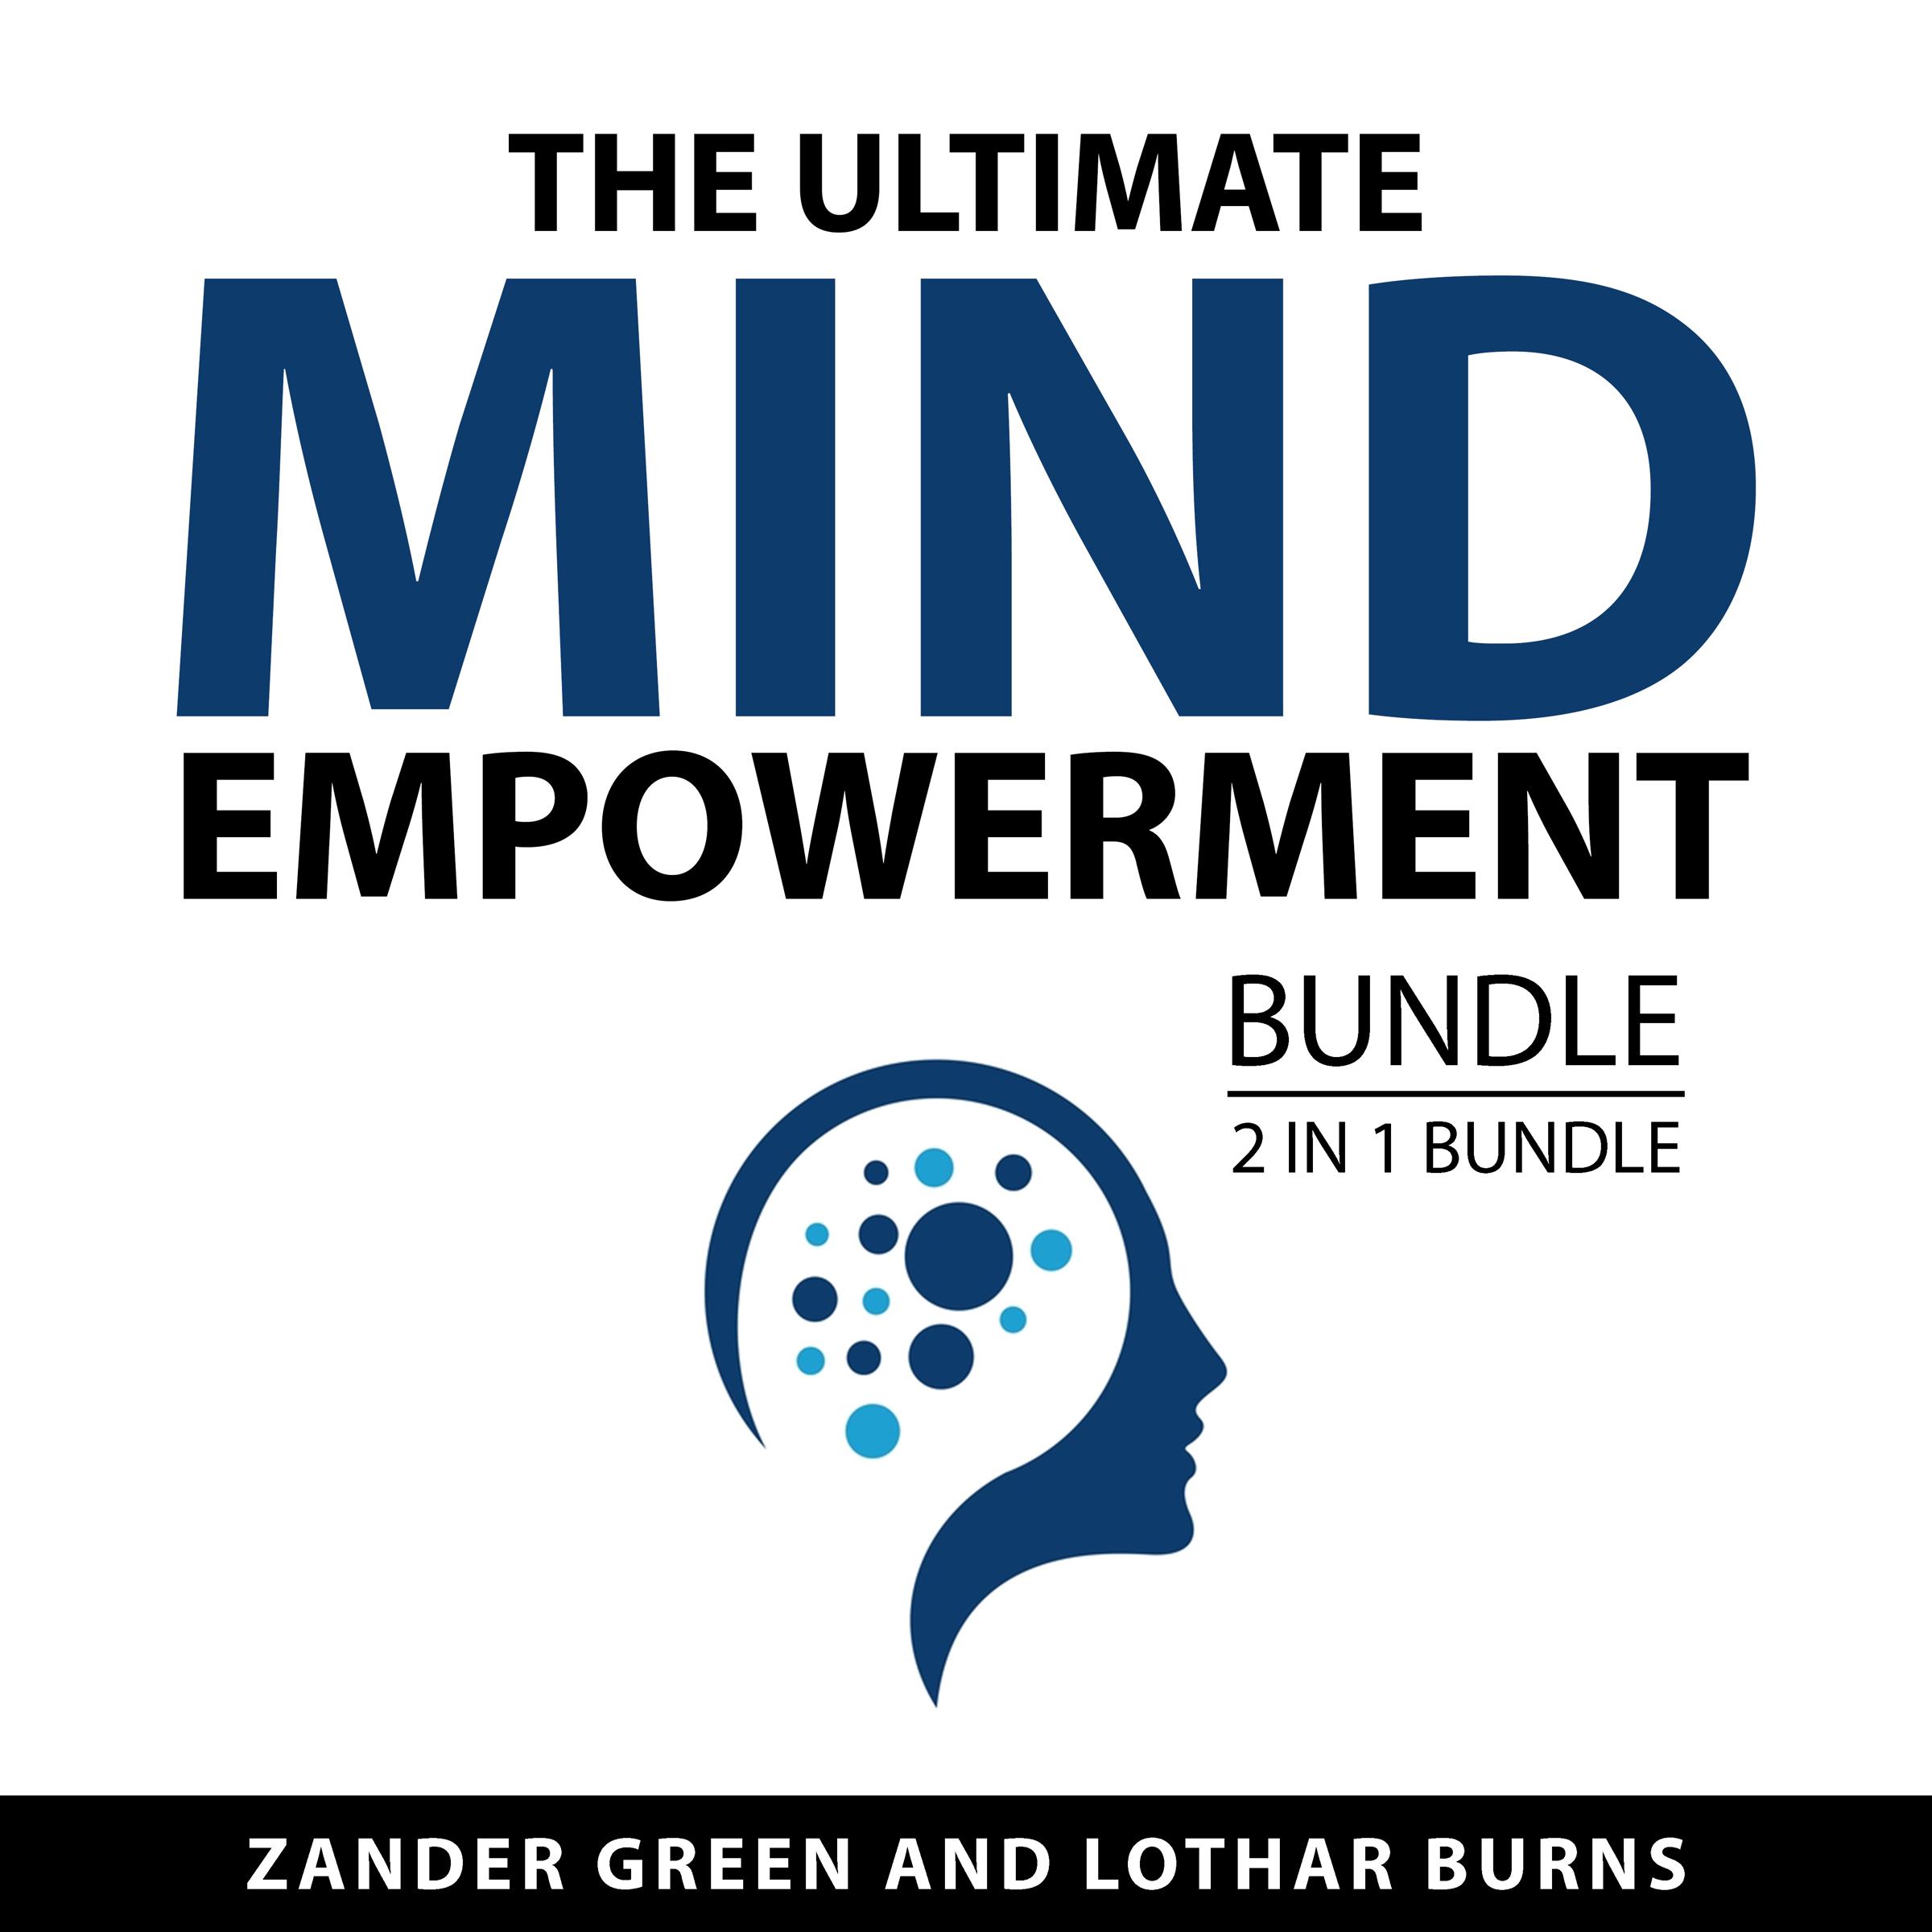 The Ultimate Mind Empowerment Bundle, 2 in 1 Bundle